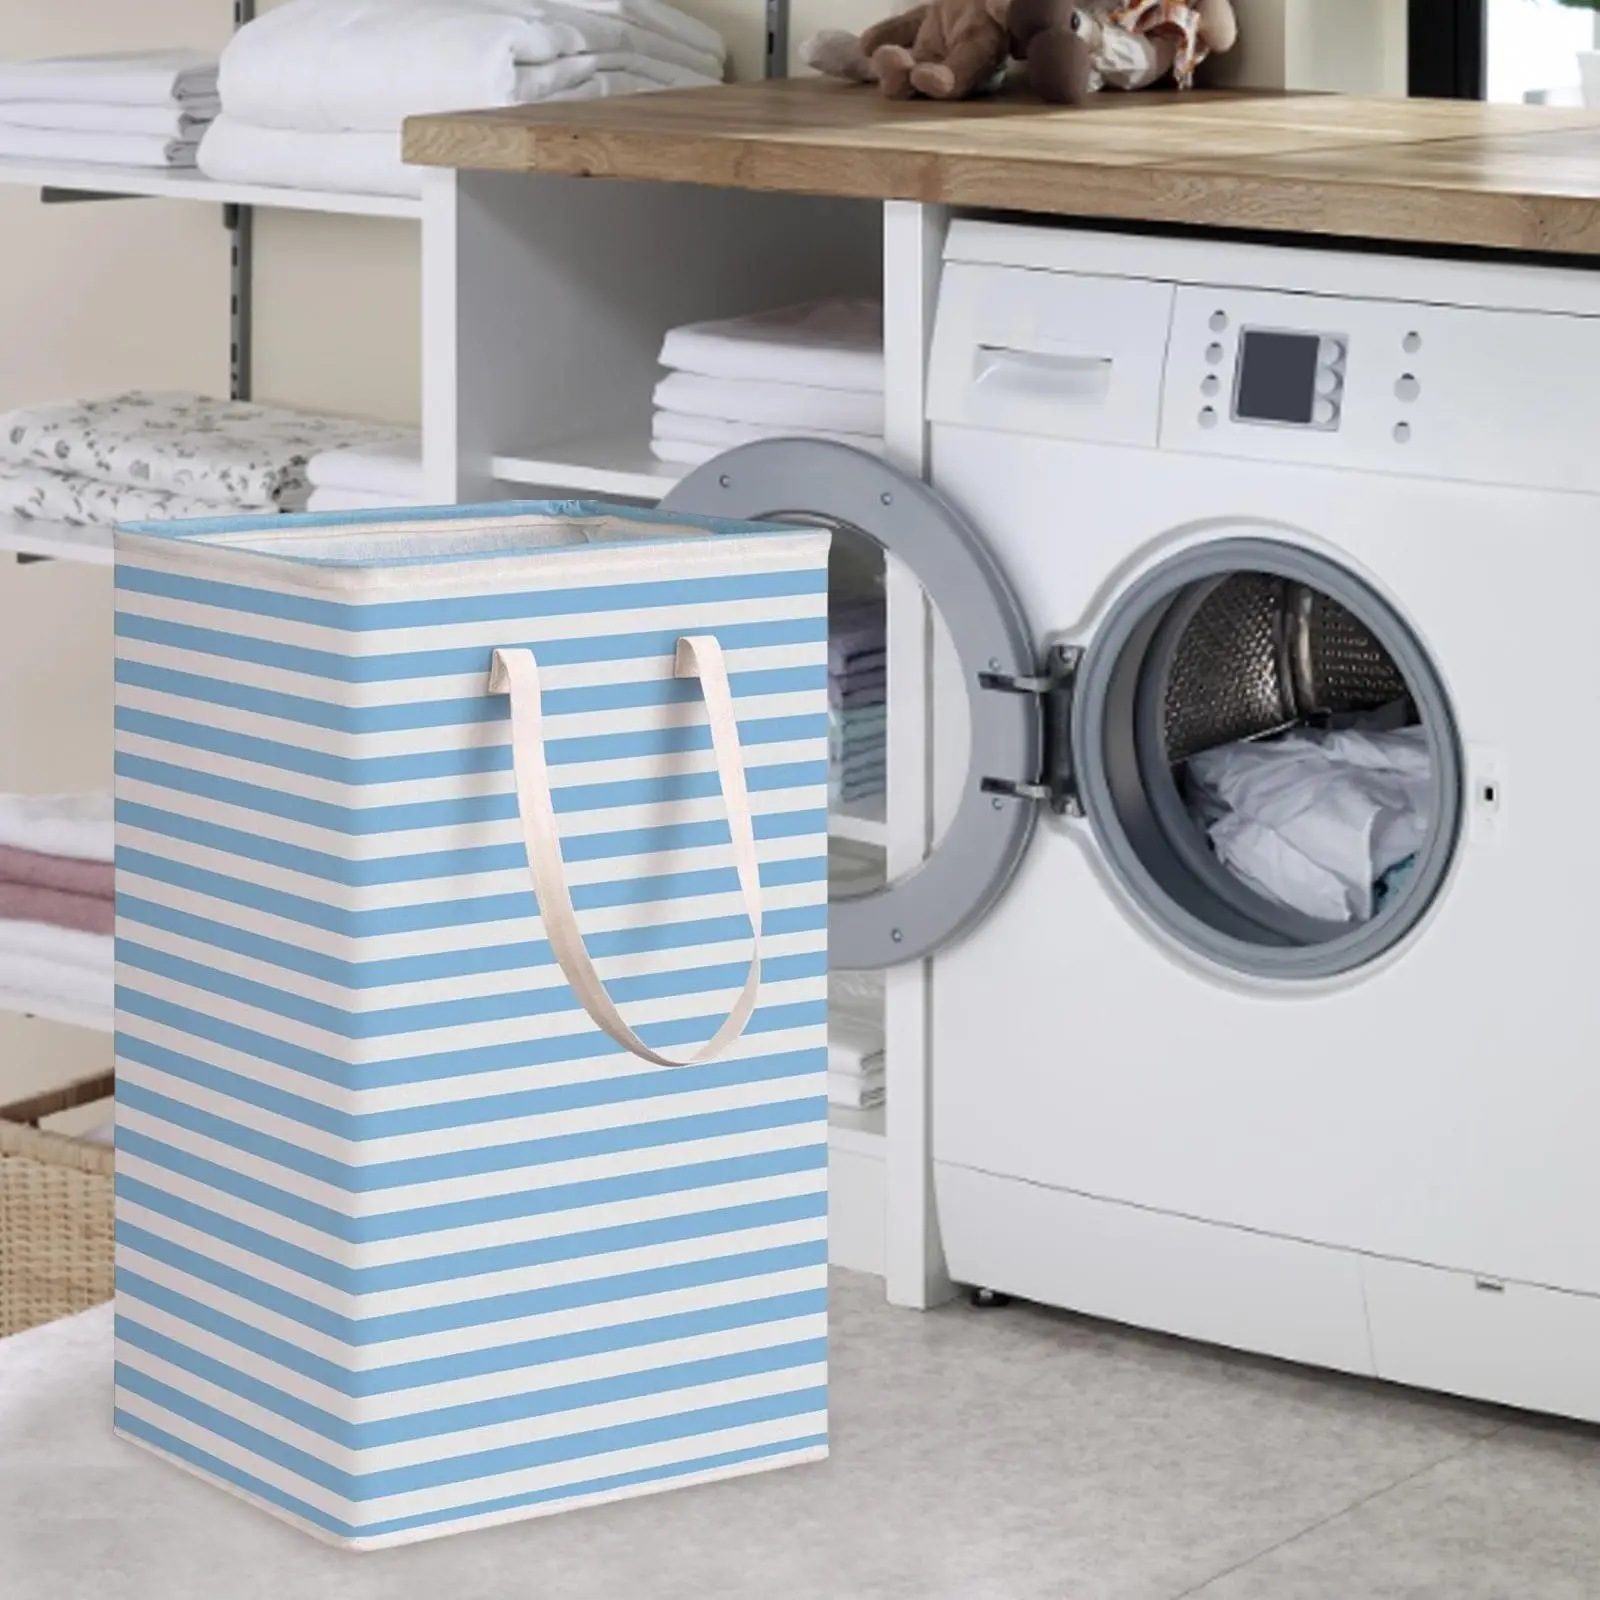 Waterproof Laundry Hamper with Handles Toys Clothes Organizer Washing Bin Clothes Hamper Storage Basket for Apartments Hotel